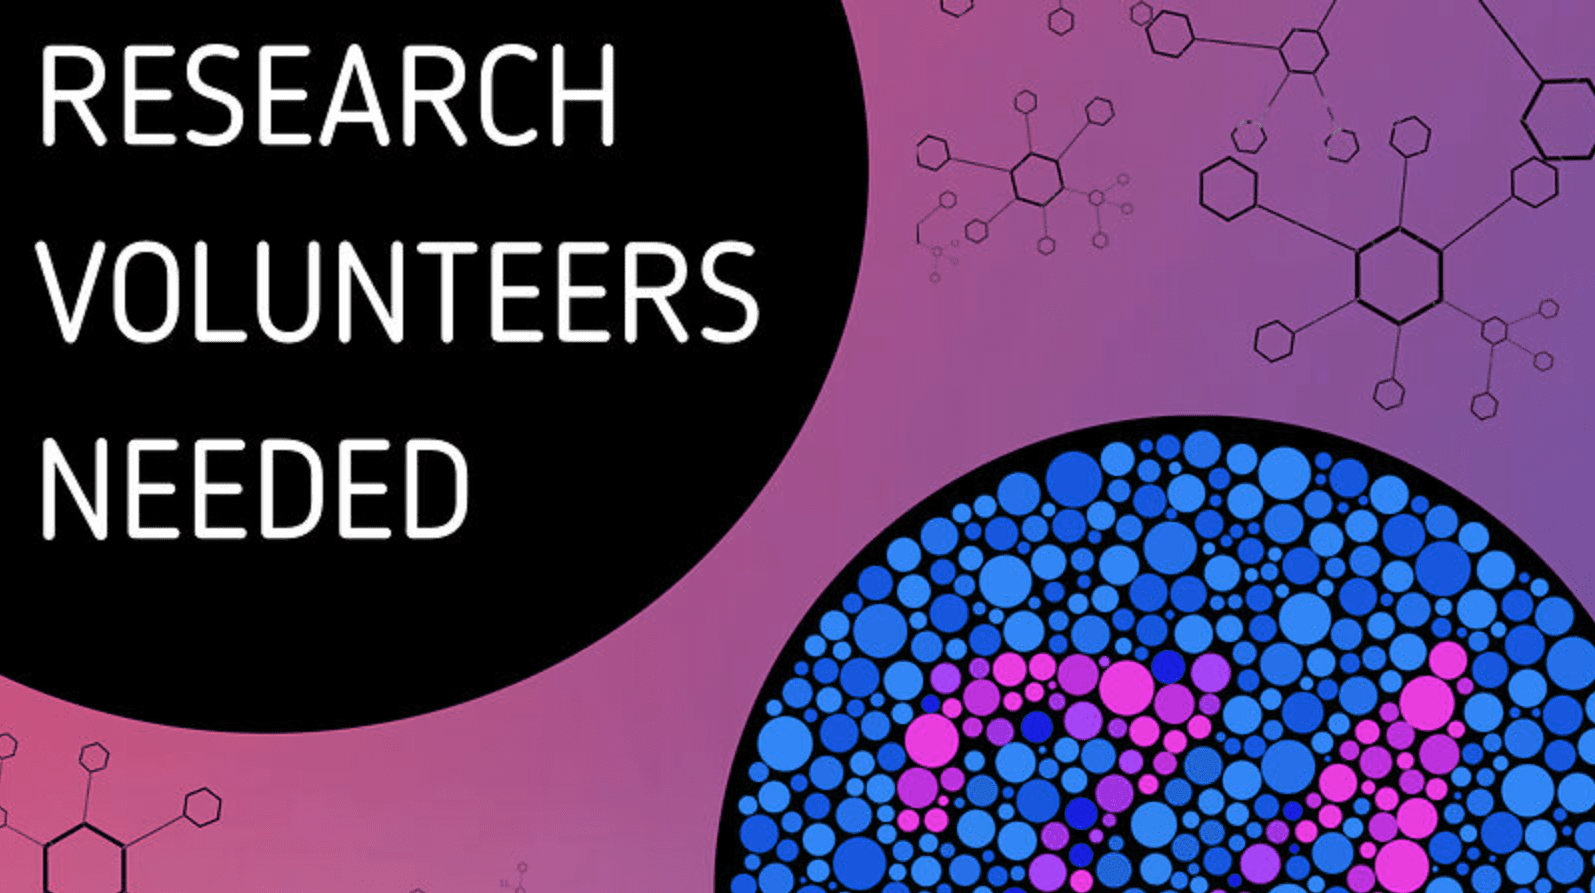 Decorative graphic that says "Research volunteers needed."